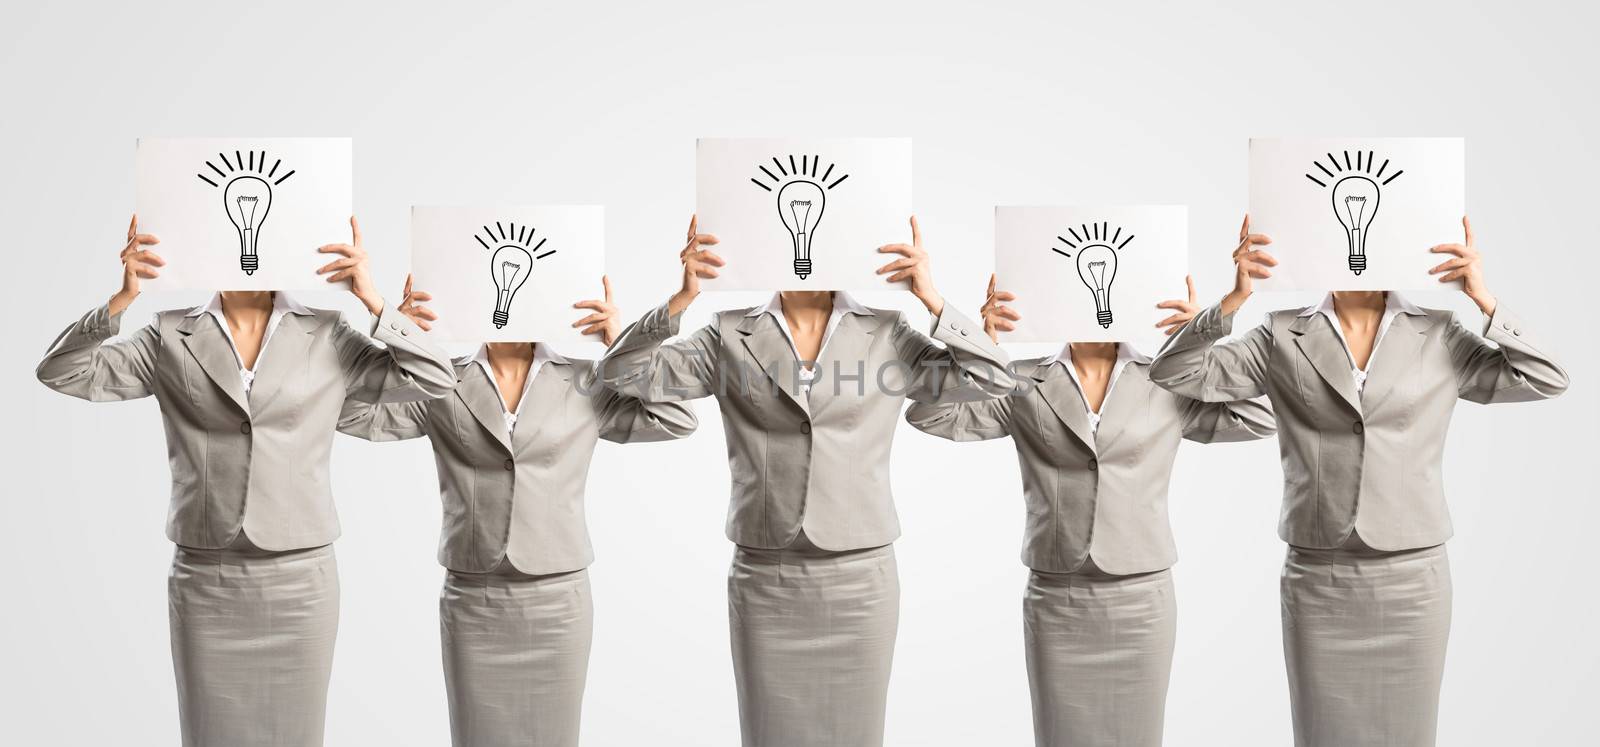 image of a businesswomen standing in a row, concept of teamwork